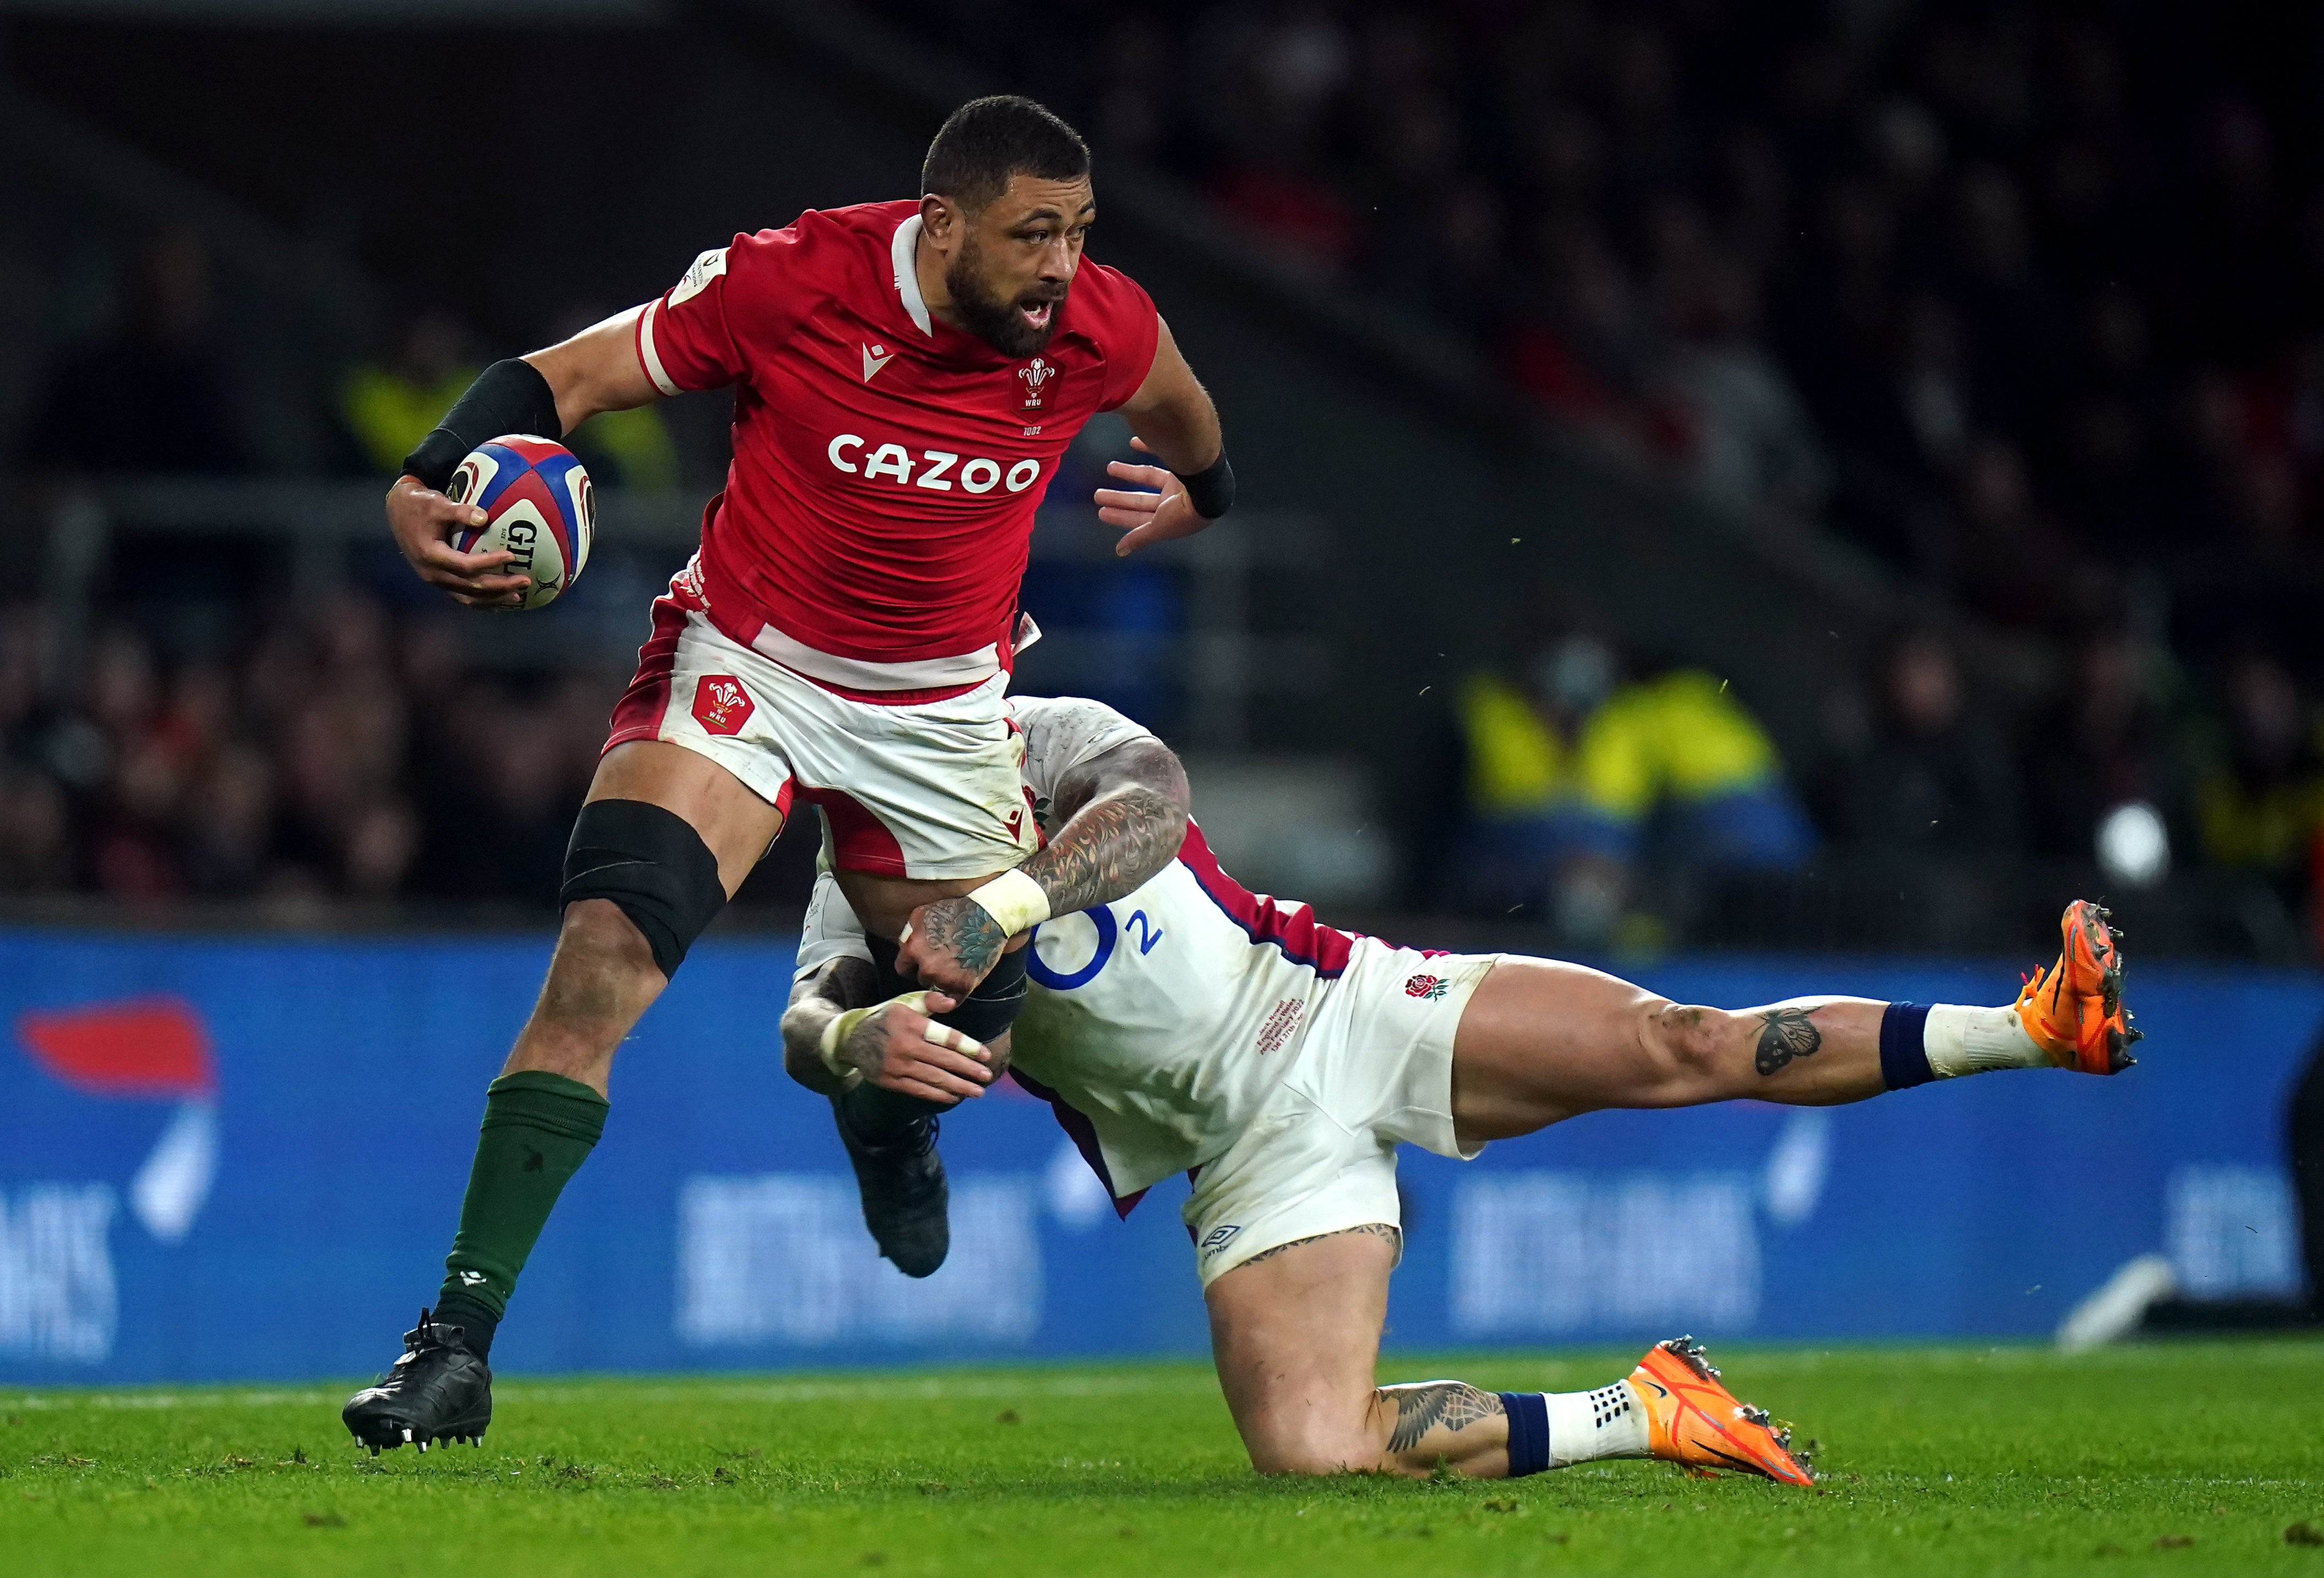 Taulupe Faletau could be key for Wales this afternoon